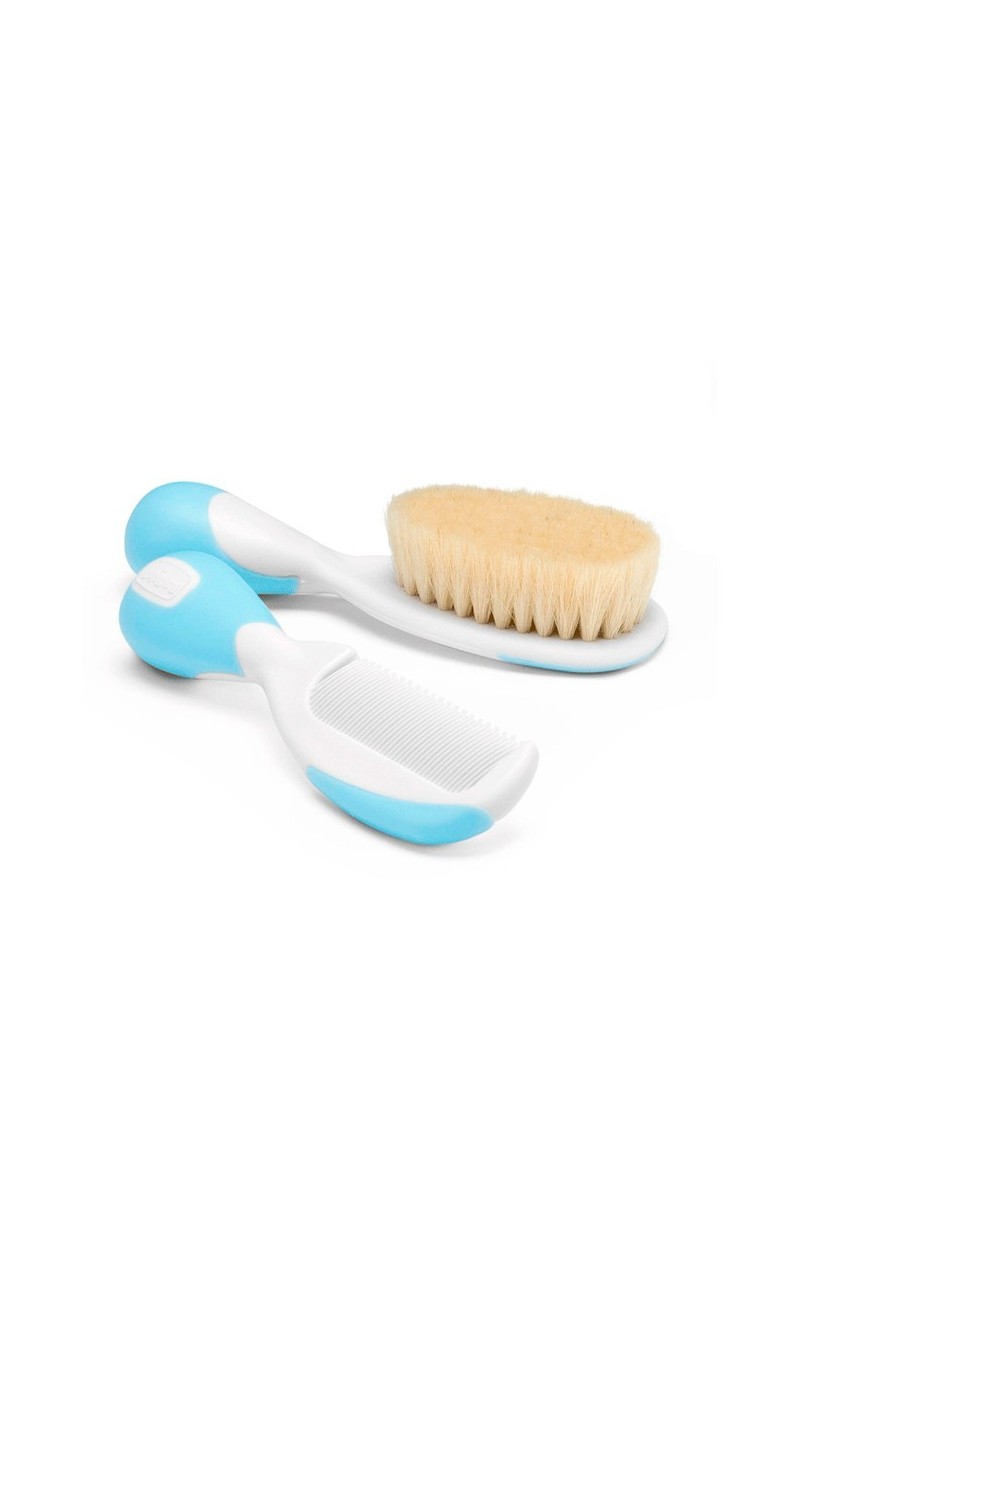 Chicco Blue Natural Hair Brush and Comb 1U